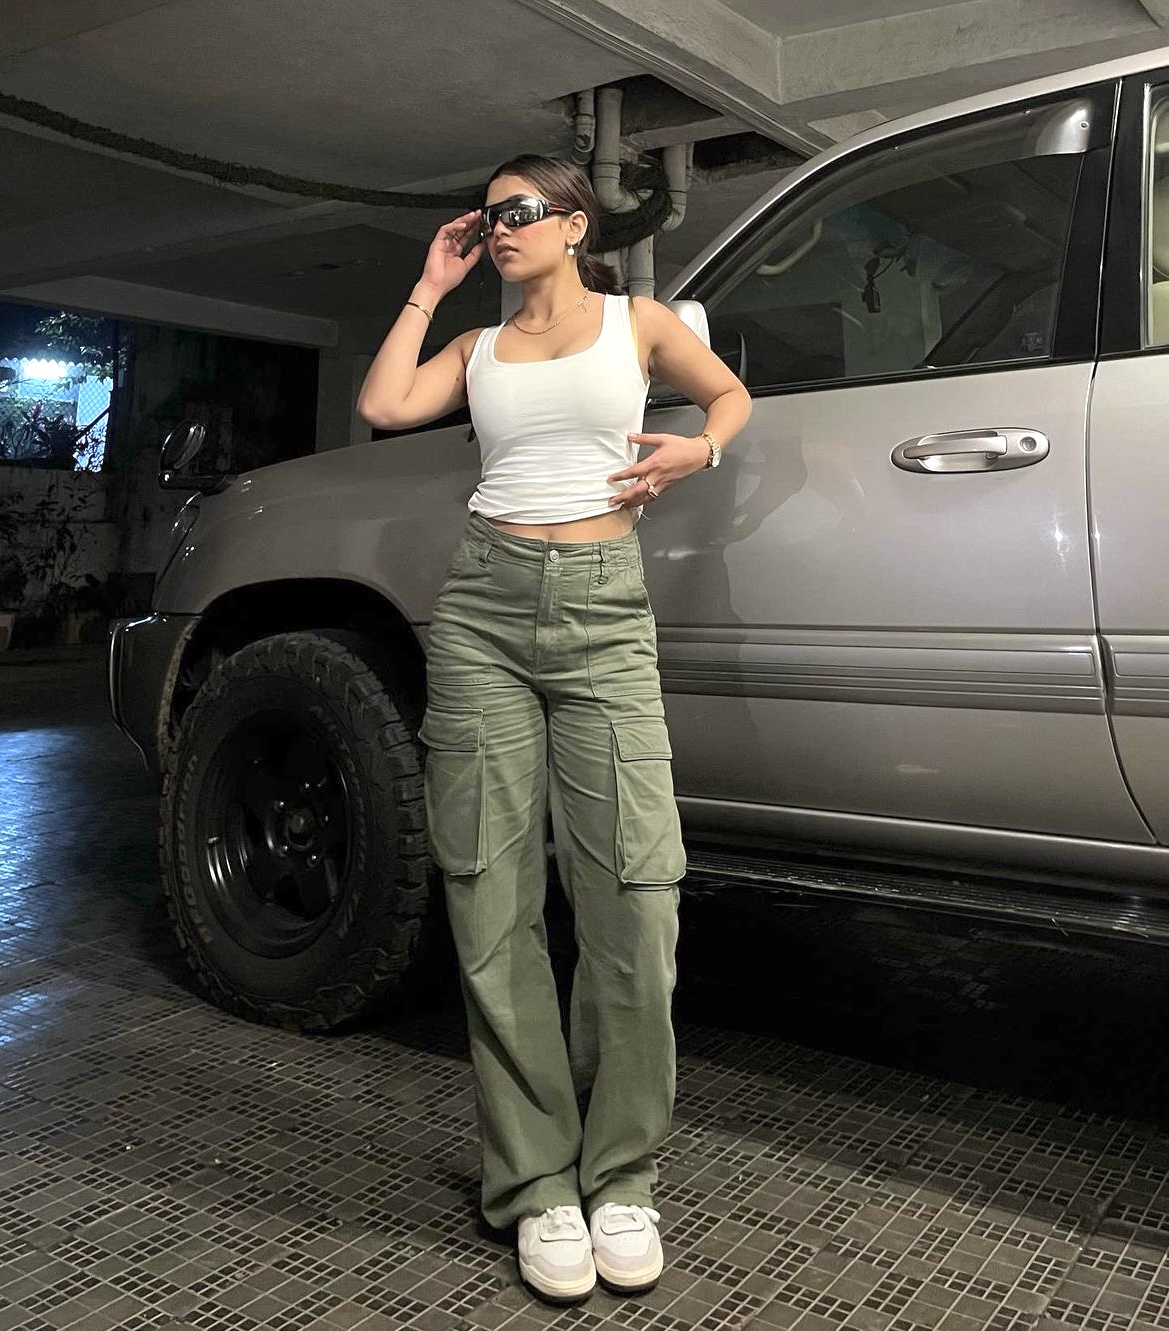 Women Black Harlan Pants Ladies Cargo Pants Skinny Pants Girls Overalls  Casual Trousers - China Cargo Pants and Woman price | Made-in-China.com